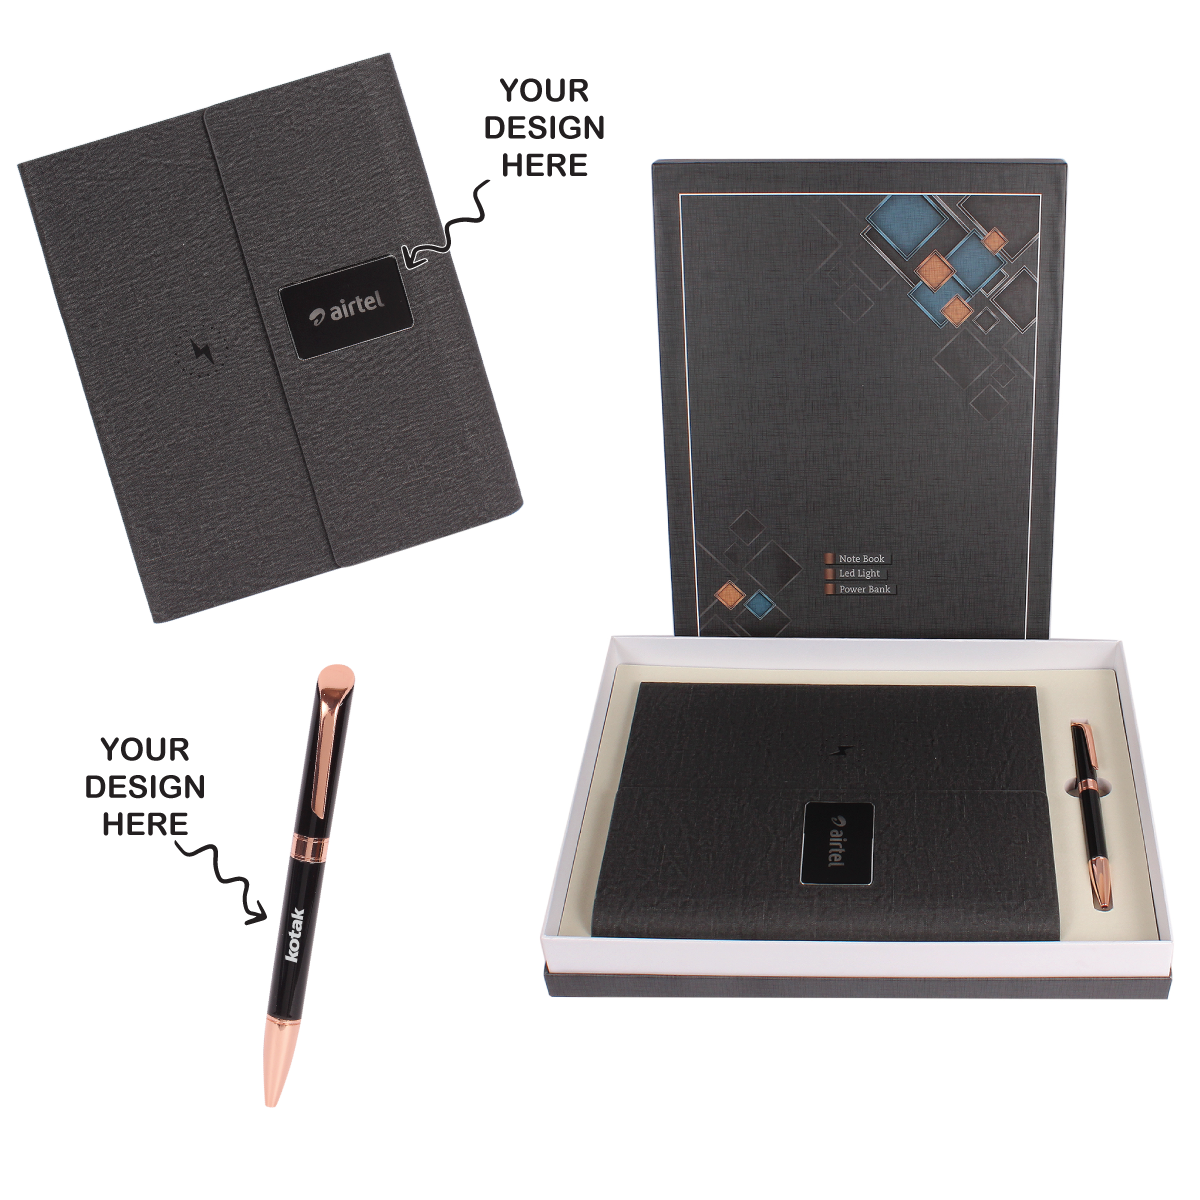 Engraved 2 in 1 Grey 10000mAh Power Bank Notebook Diary with Pen Logo Glow Combo Gift Set - For Employee Joining Kit, Client, Dealer Gifting, Corporate Gifting or Return Gift HK10247